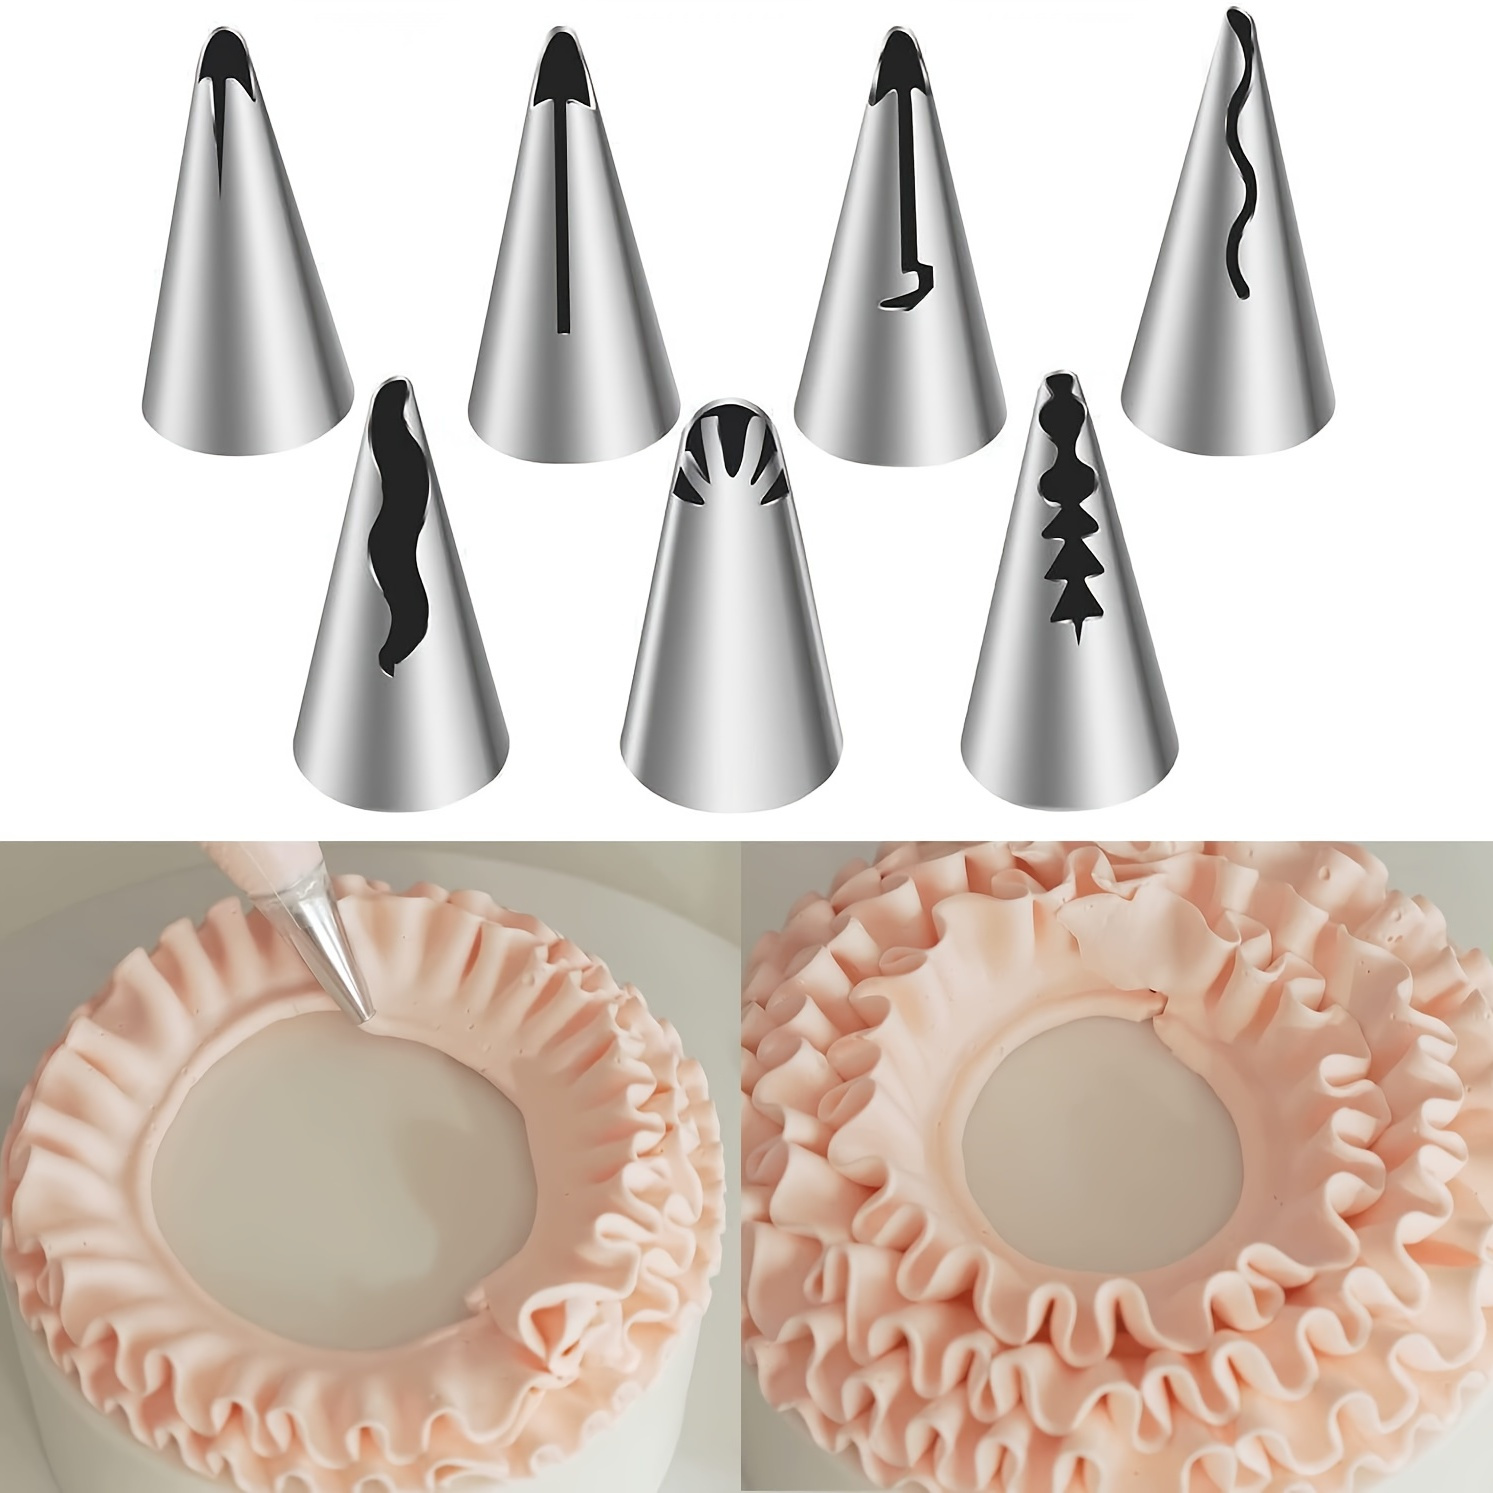 

7pcs Stainless Steel Pleated Skirt Tube Nozzle Set For Pastry And Cake Decorating - Baking Supplies With Easy Release Design